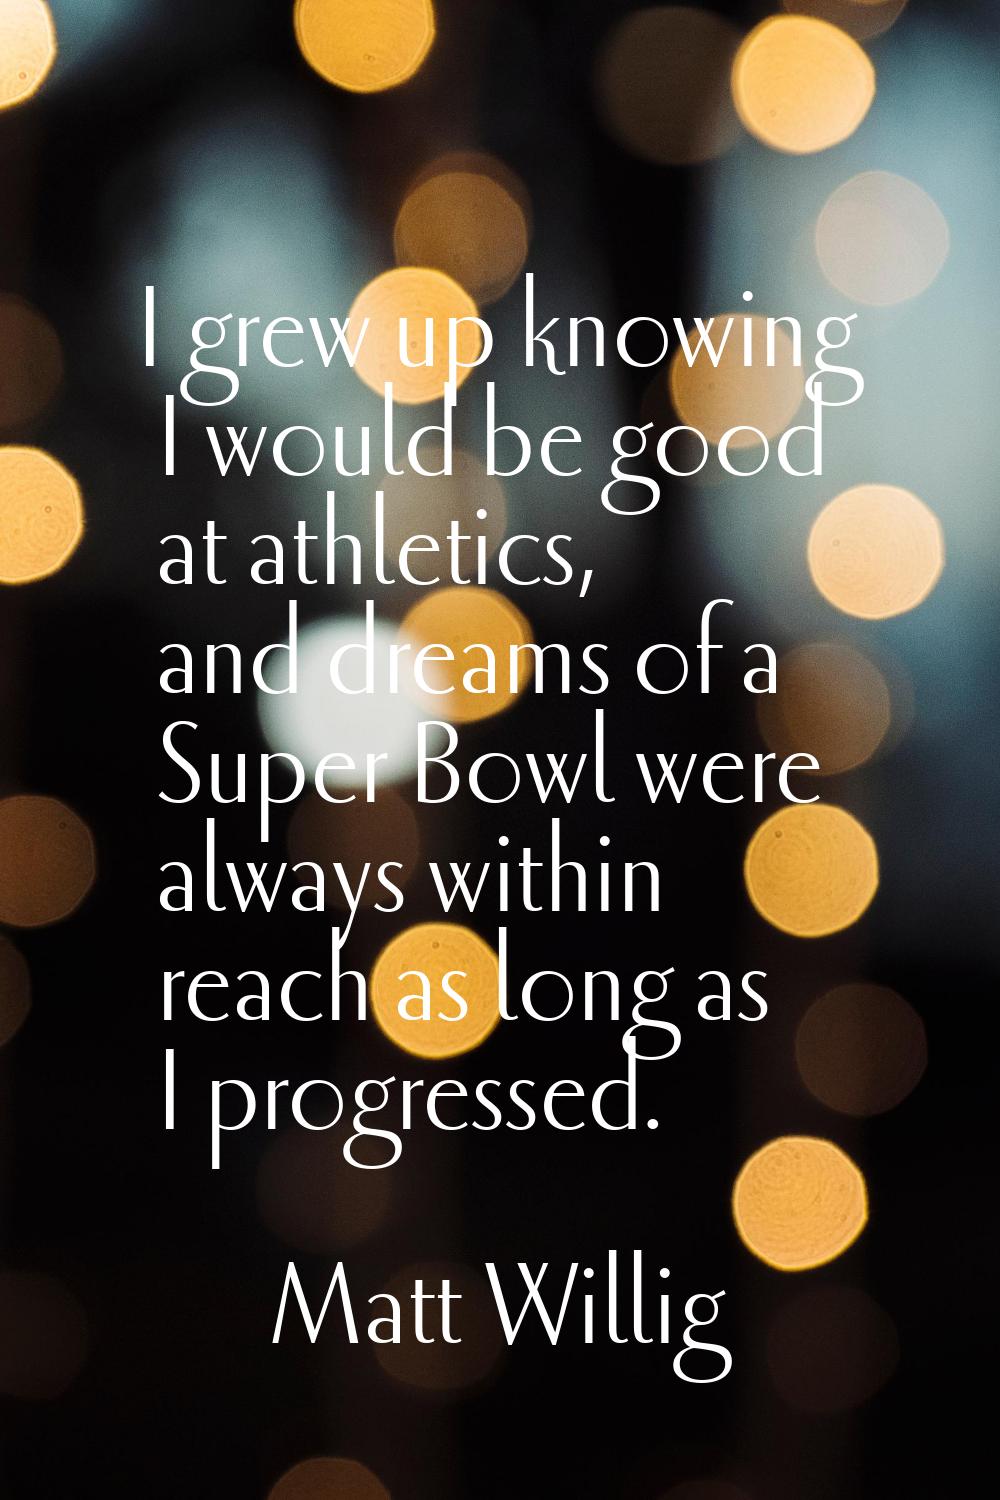 I grew up knowing I would be good at athletics, and dreams of a Super Bowl were always within reach